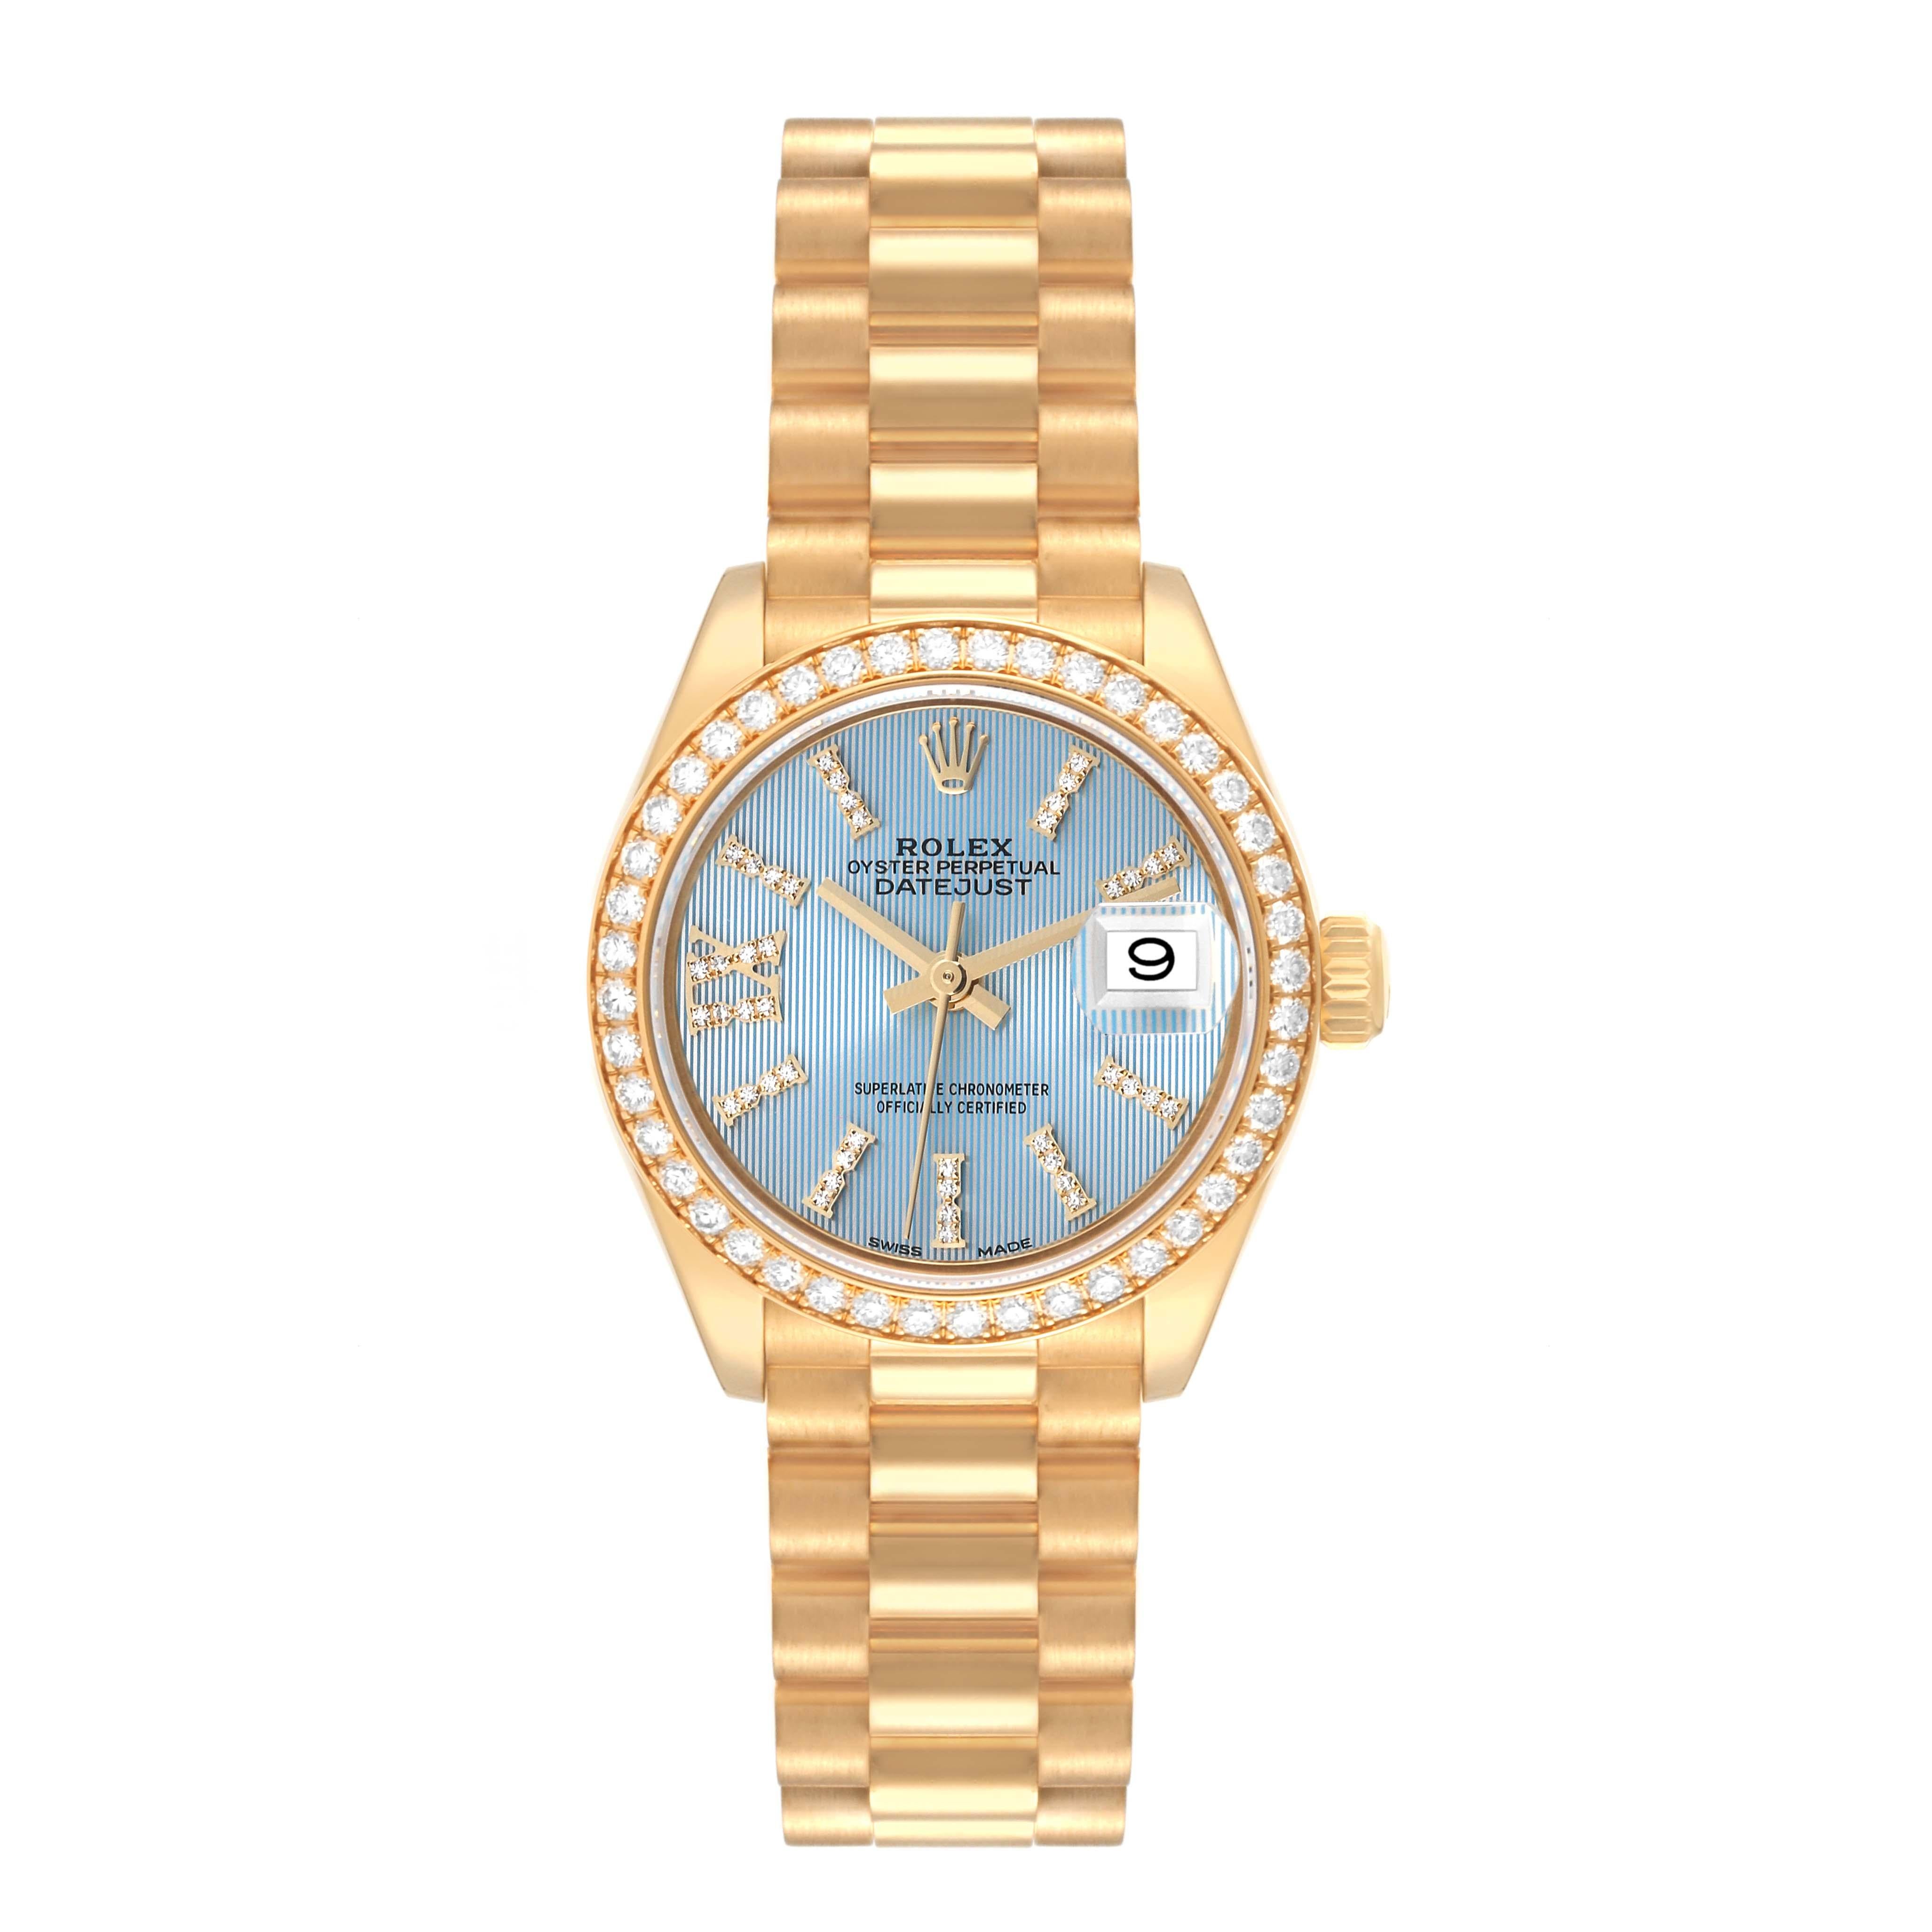 Rolex Datejust President Yellow Gold Diamond Bezel Ladies Watch 279138. Officially certified chronometer self-winding movement with quickset date function. 18k yellow gold oyster case 28.0 mm in diameter. Rolex logo on the crown. Original Rolex